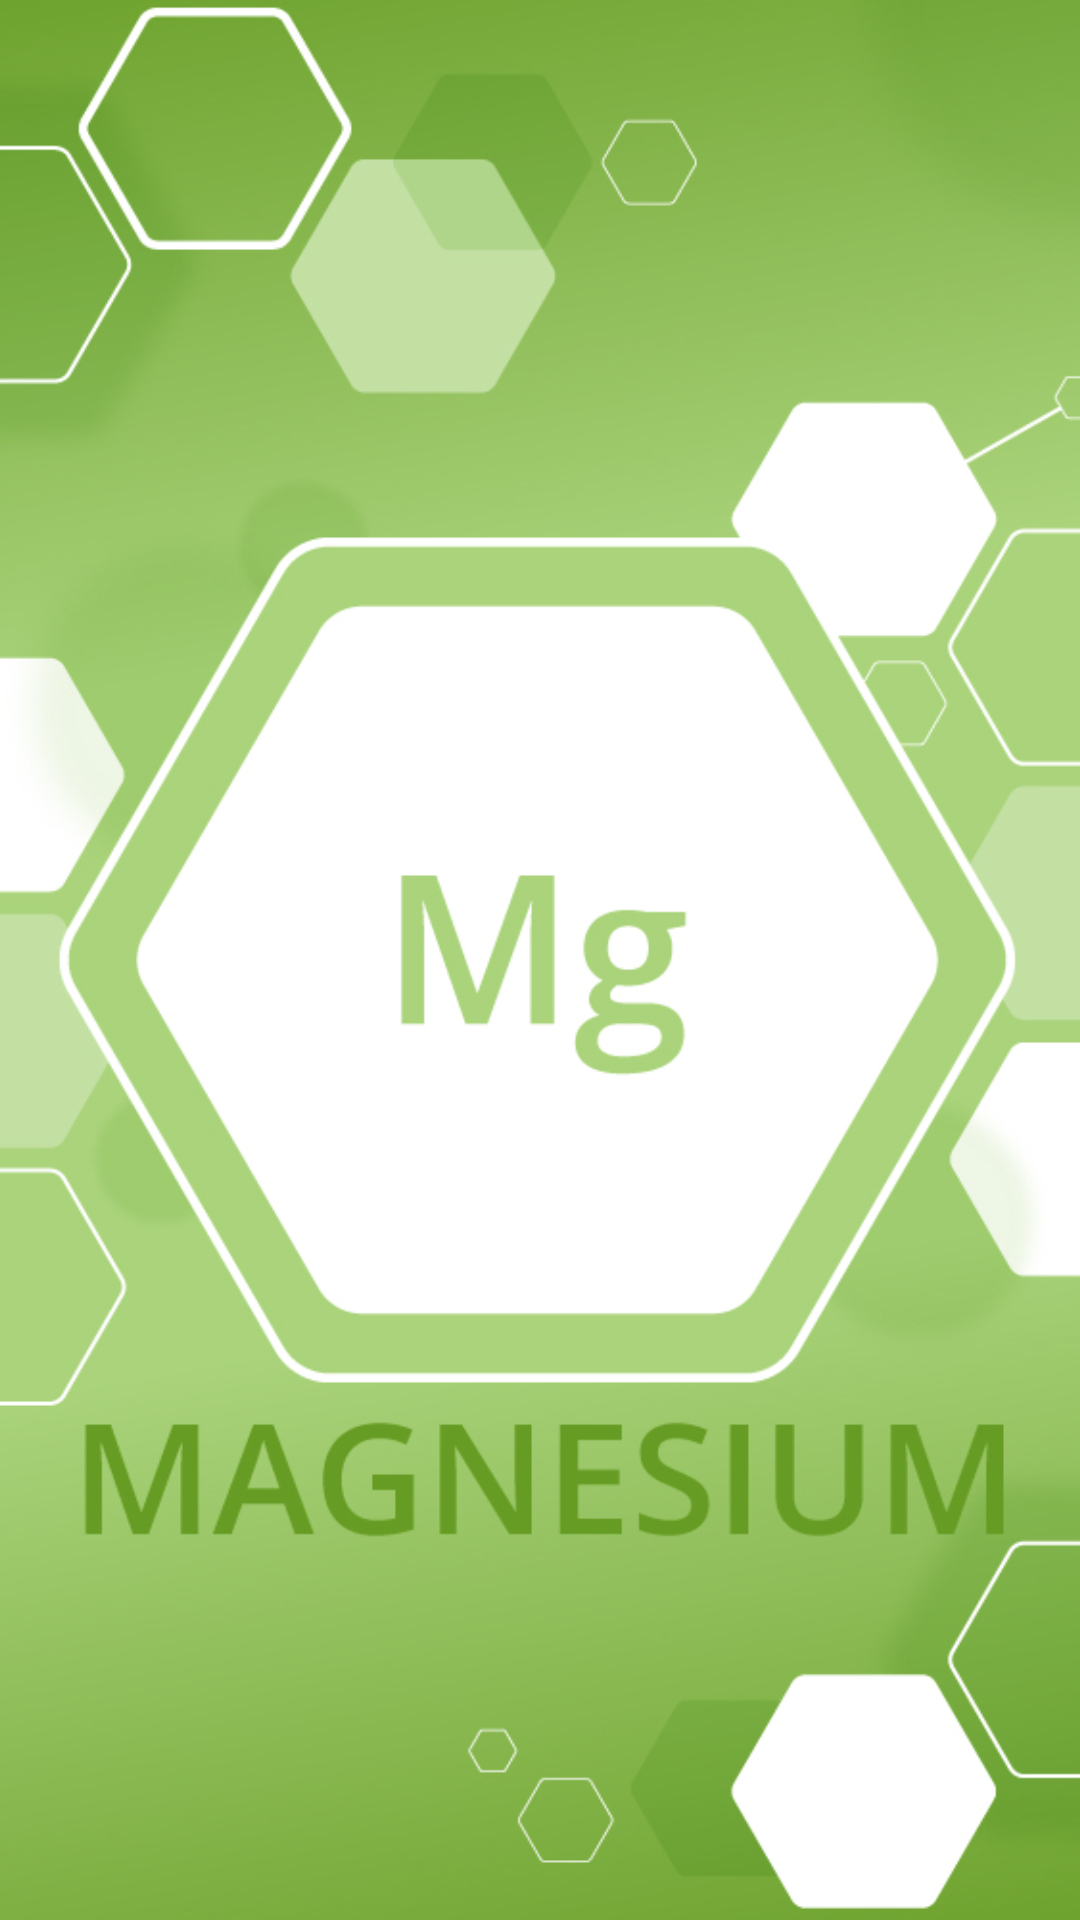 5 health conditions possibly linked to magnesium deficiency